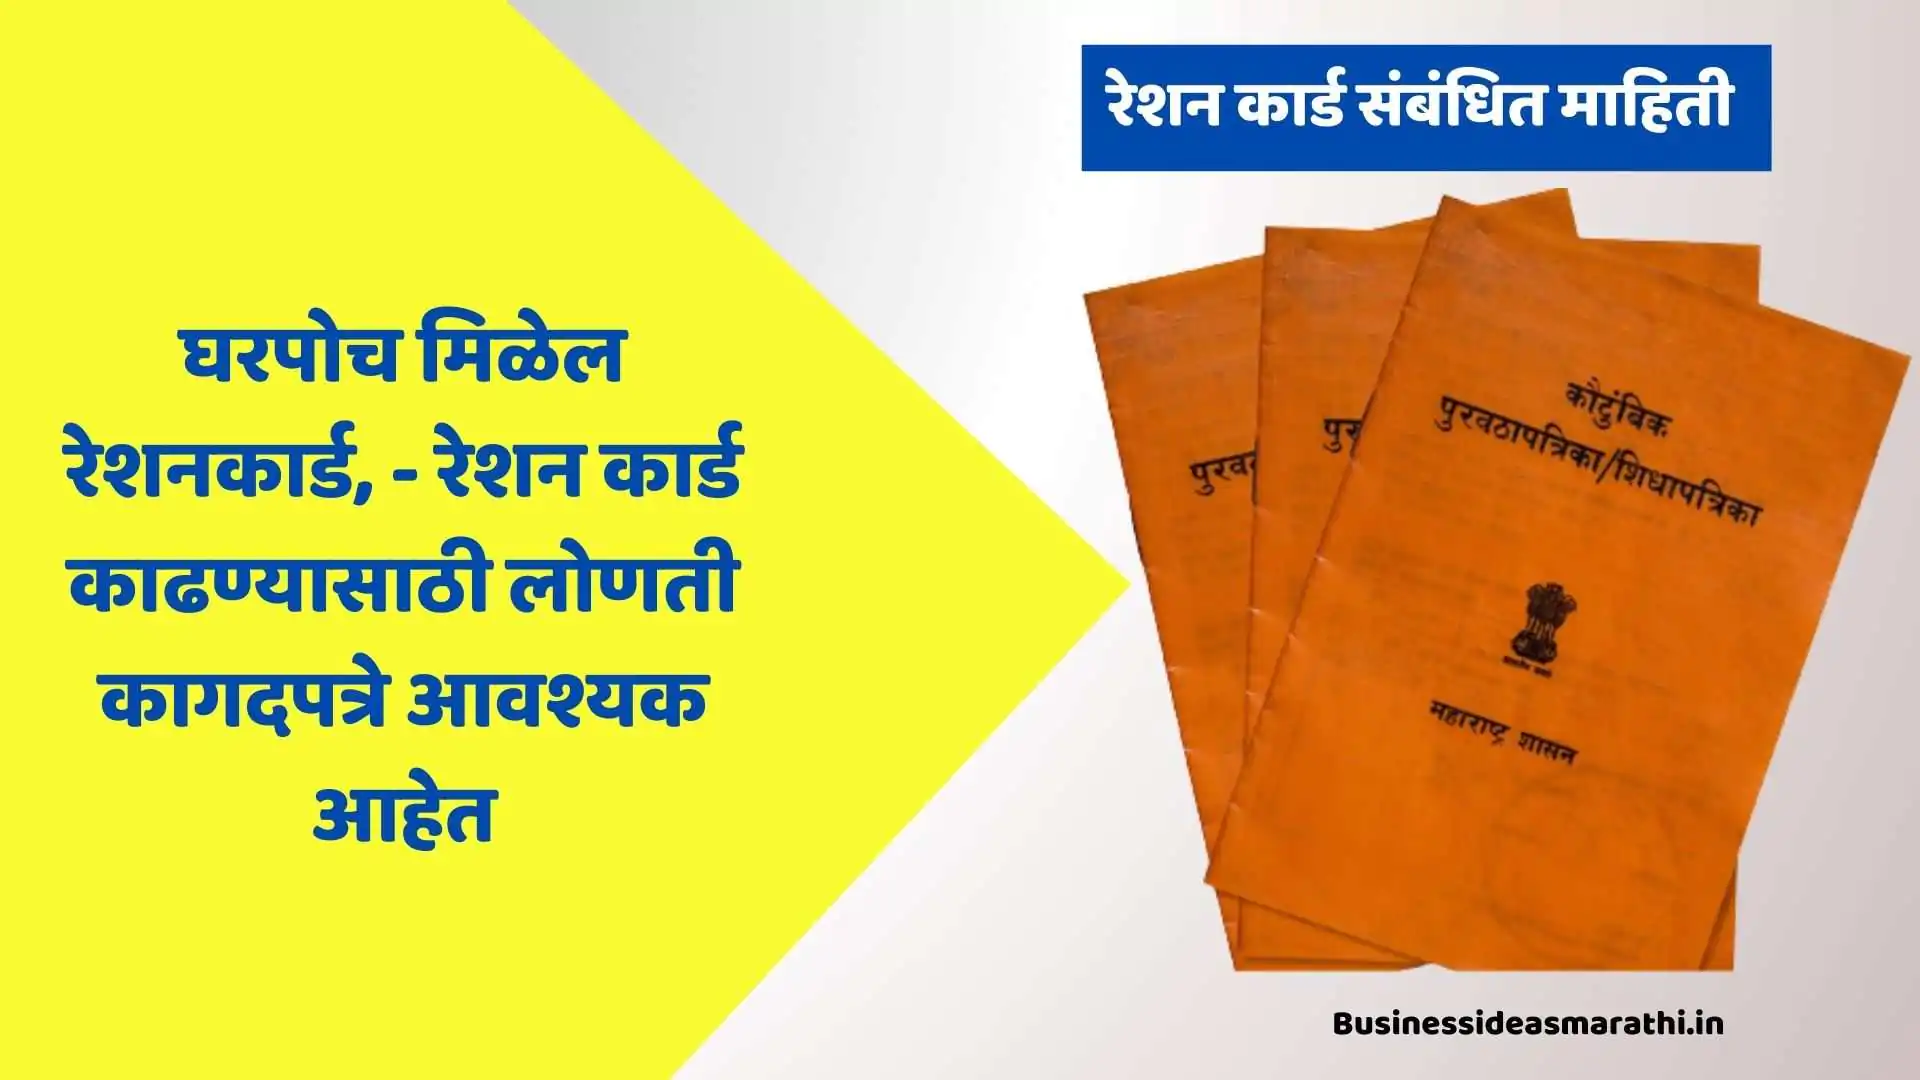 New Ration Card Information In Marathi